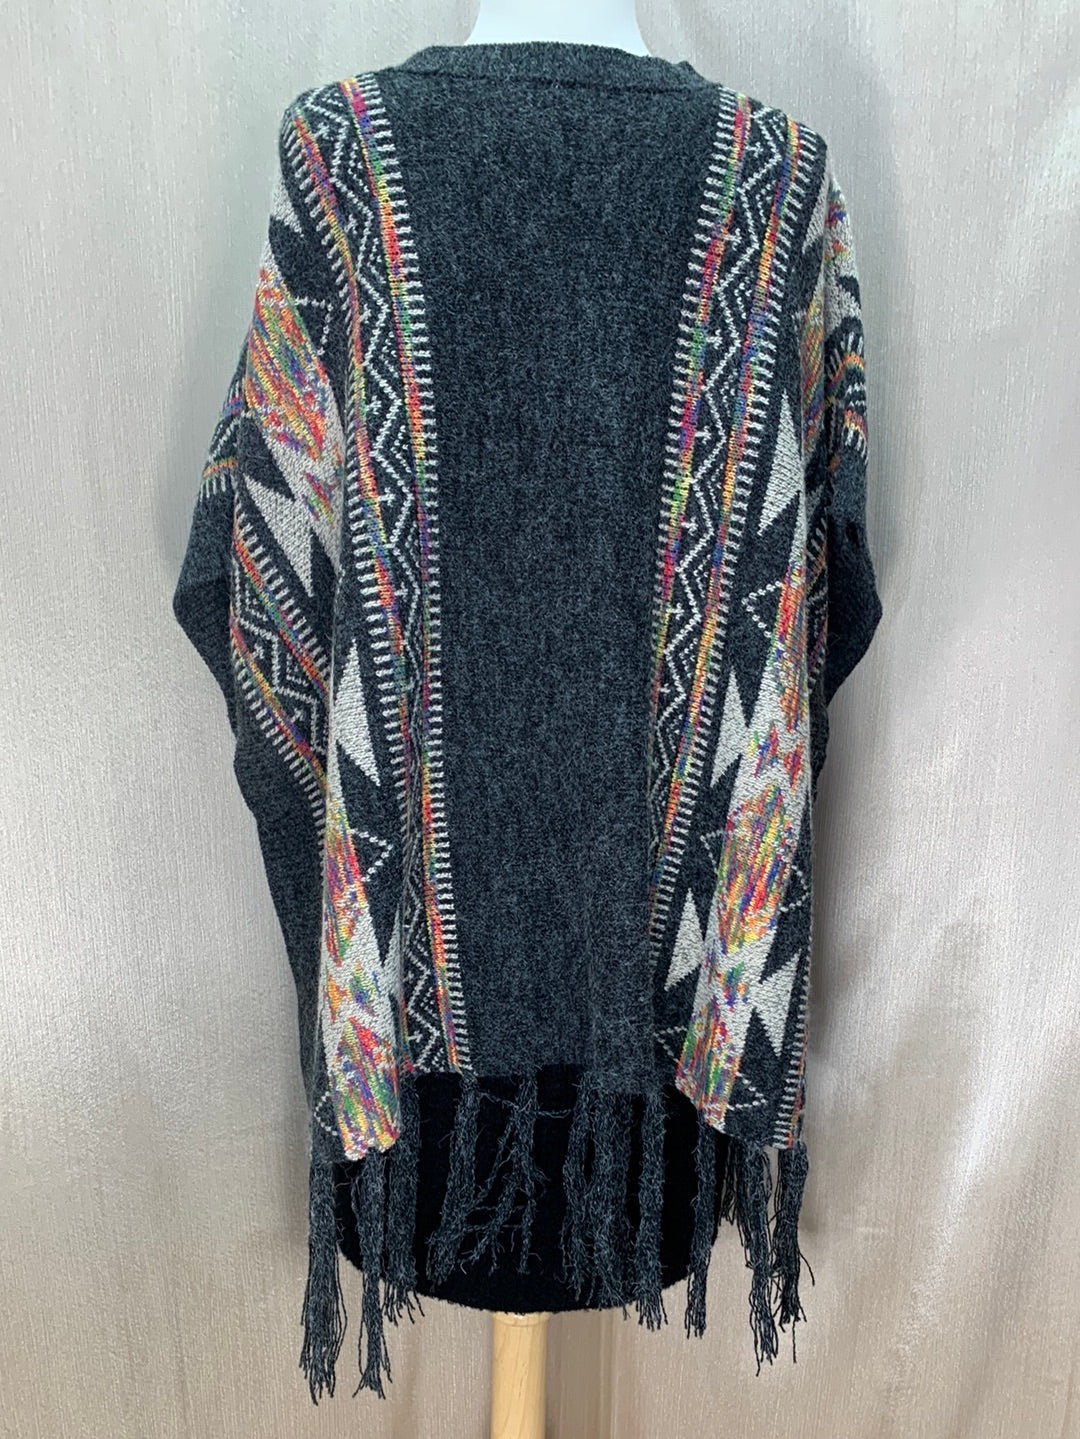 NWT - LOVE BY DESIGN charcoal multi Fringe Jacquard Sweater Poncho - M